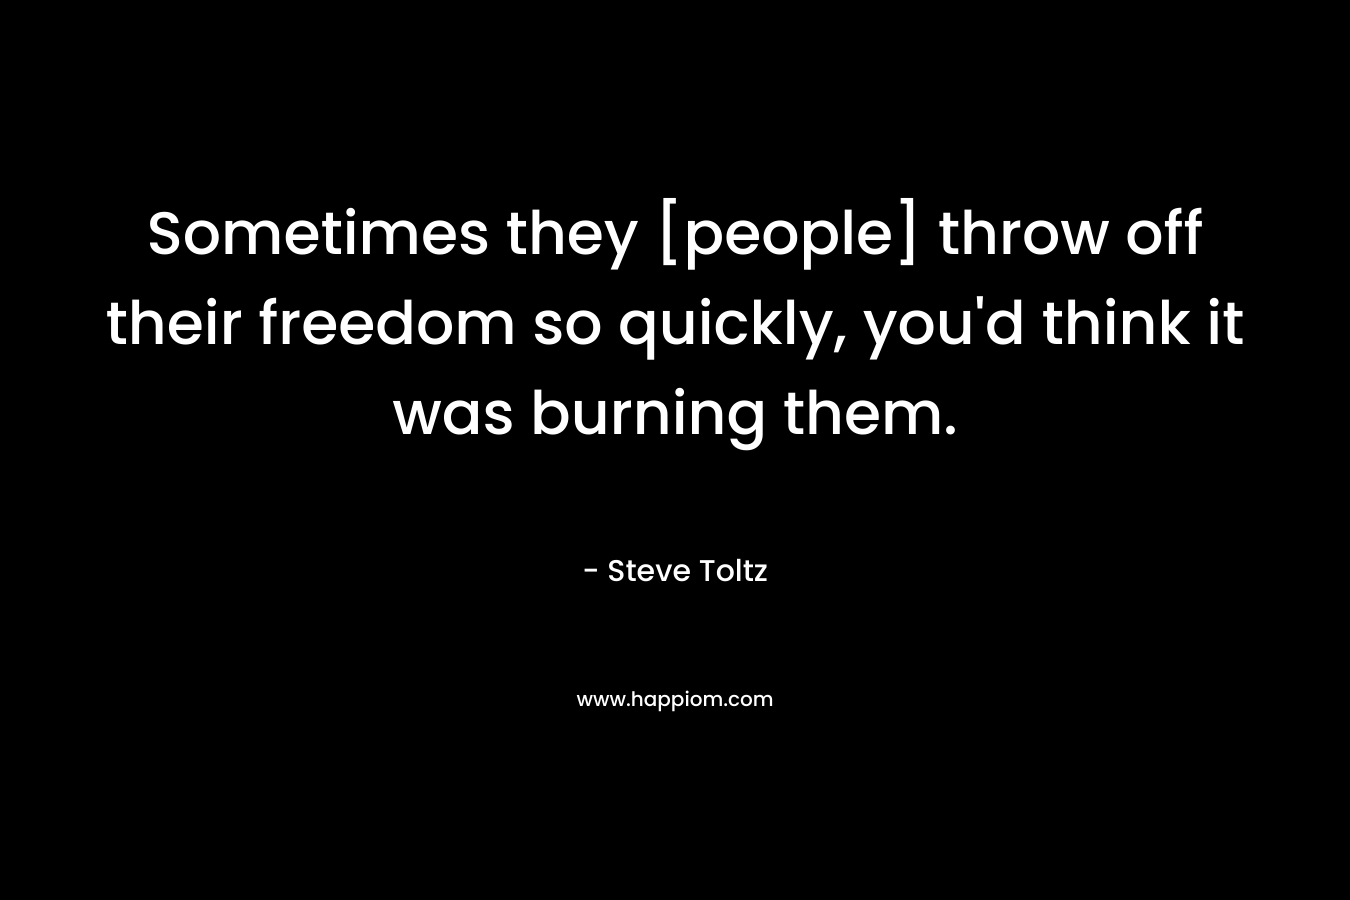 Sometimes they [people] throw off their freedom so quickly, you'd think it was burning them.